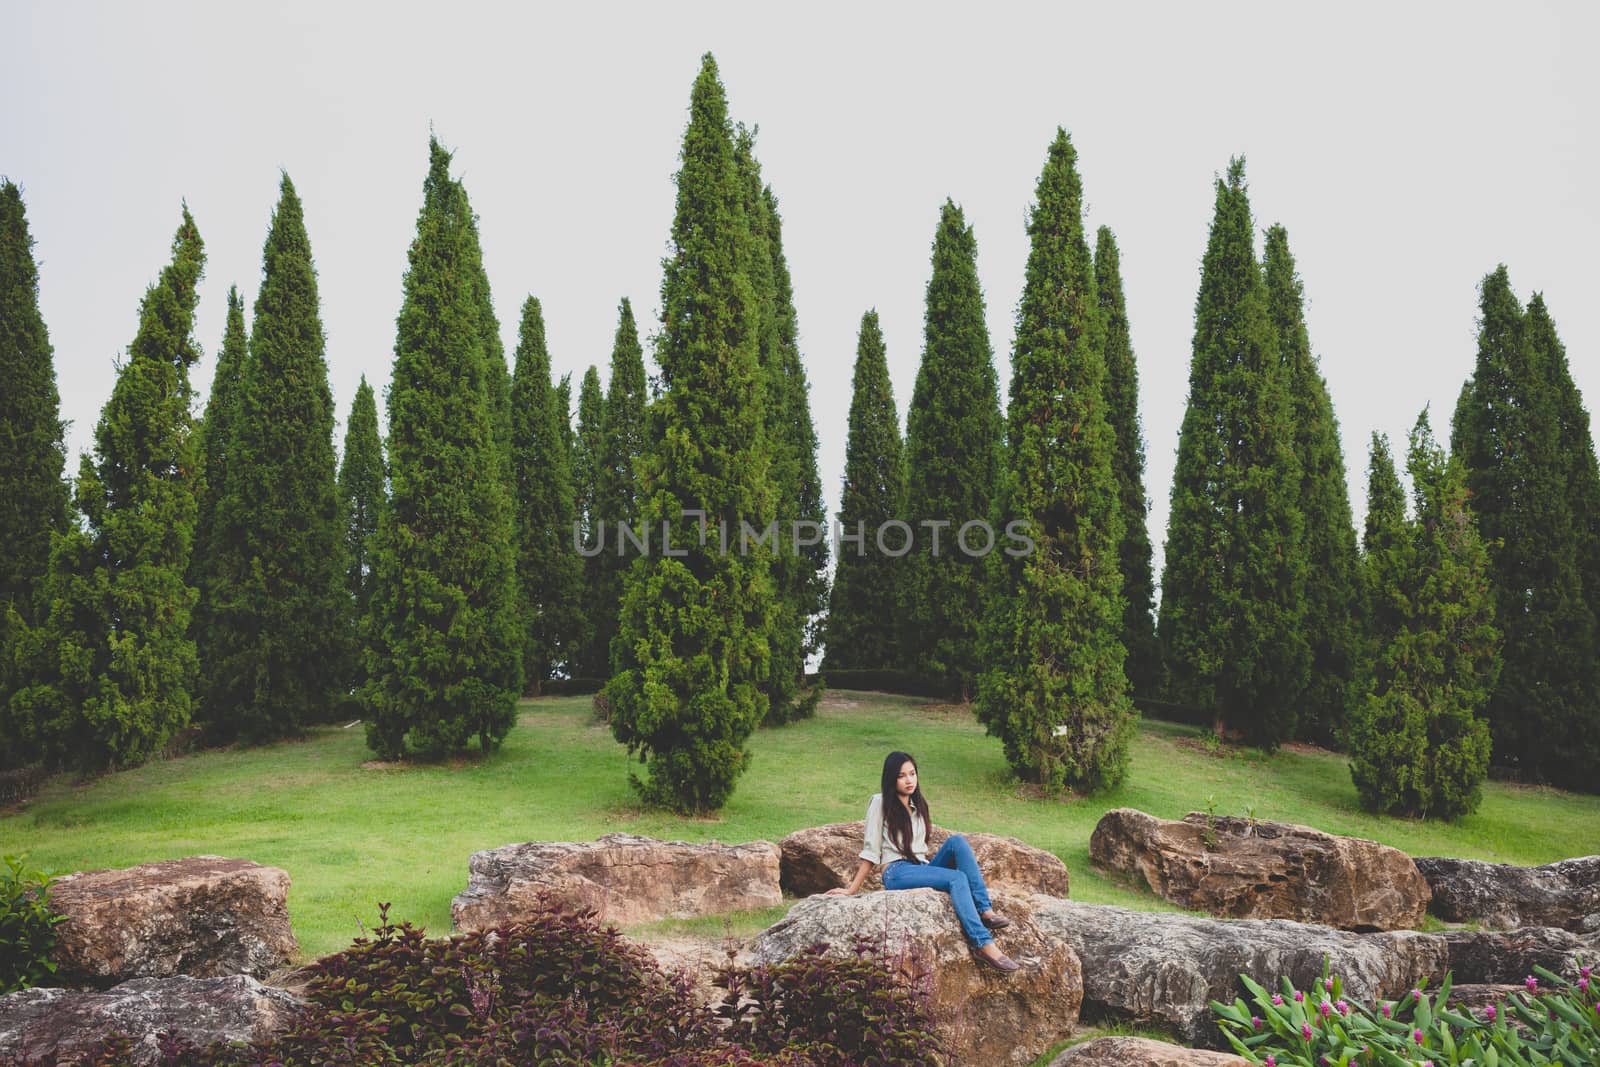 Alone women sitting on stone and pine trees by nopparats